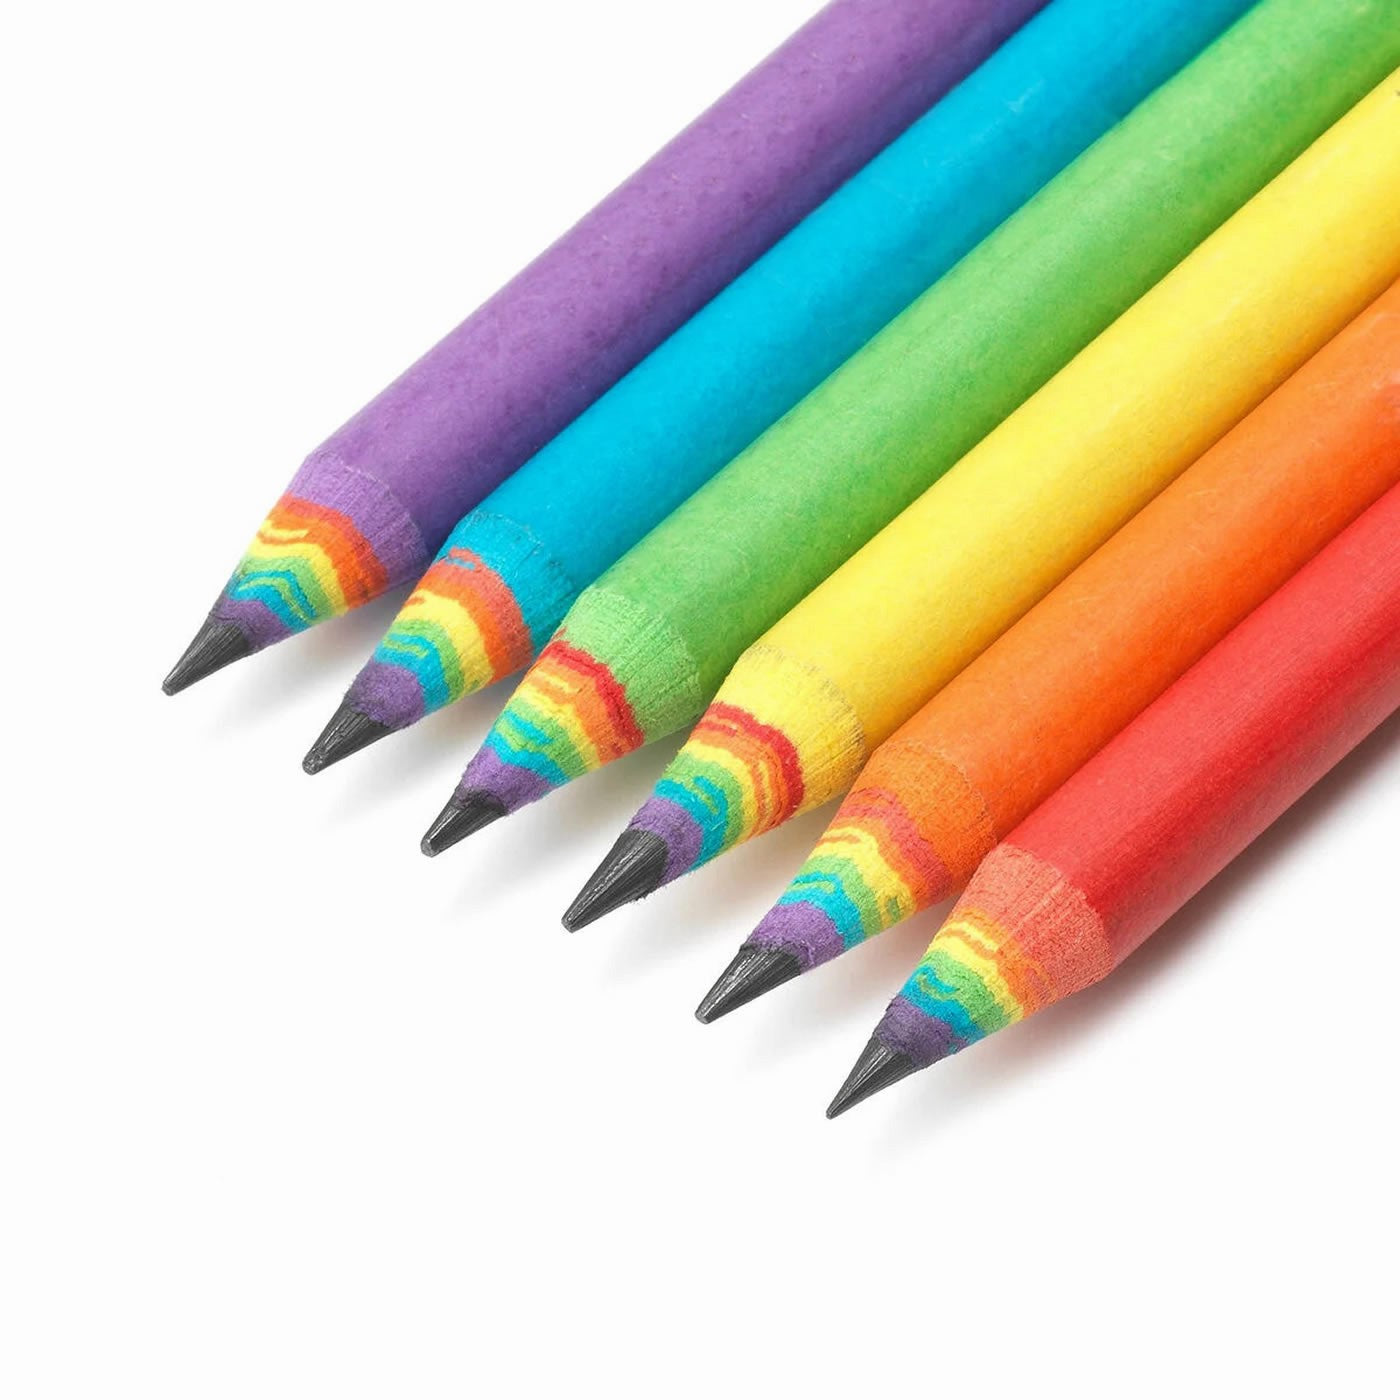 Legami Happiness for Every Day - Set of 6 HB Graphite Pencils